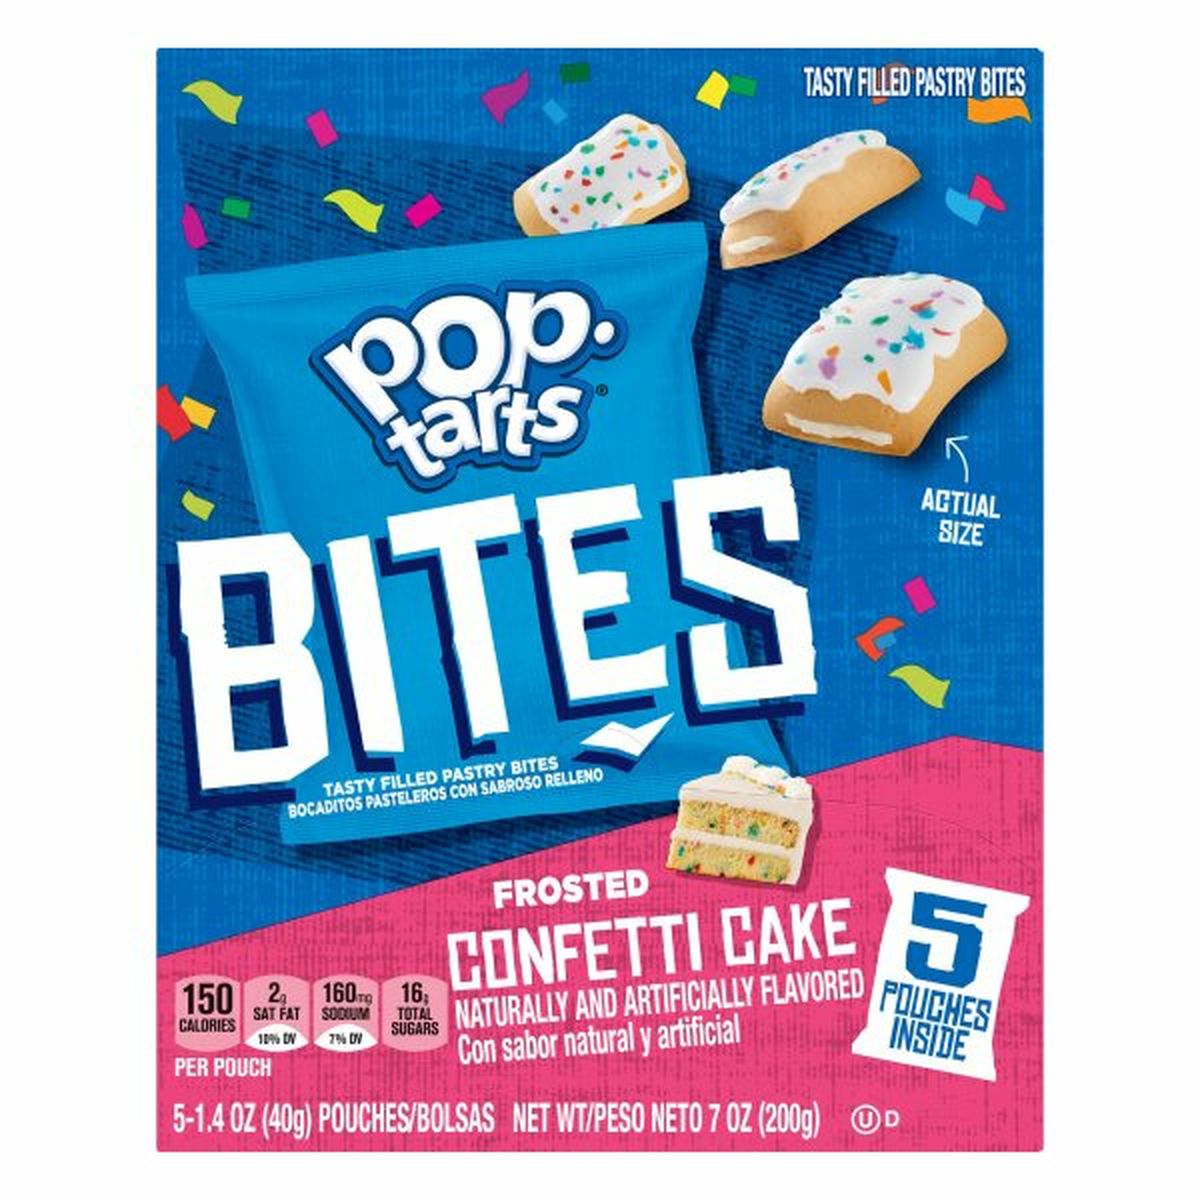 Calories in Kellogg's Pop-Tarts Bites, Frosted Confetti Cake